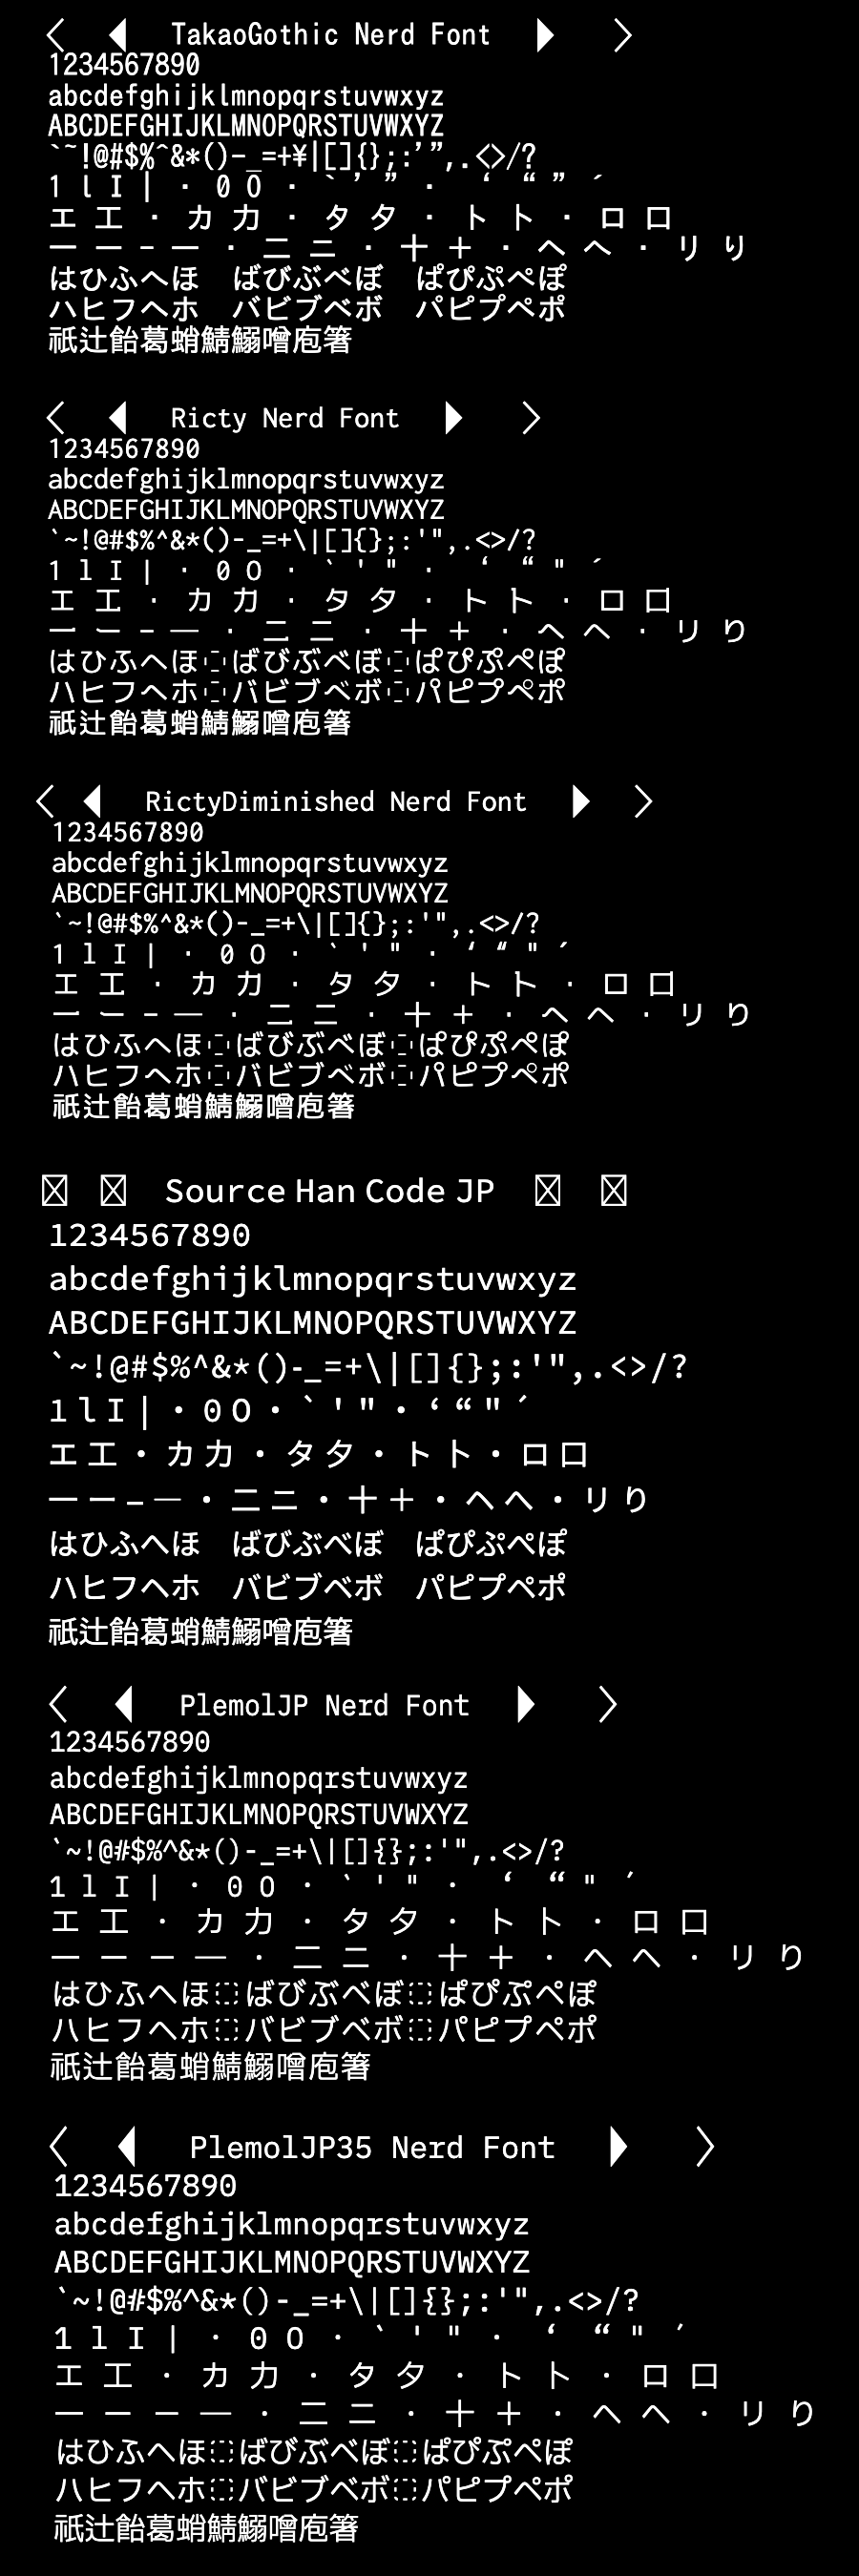 monospaced_fonts.png